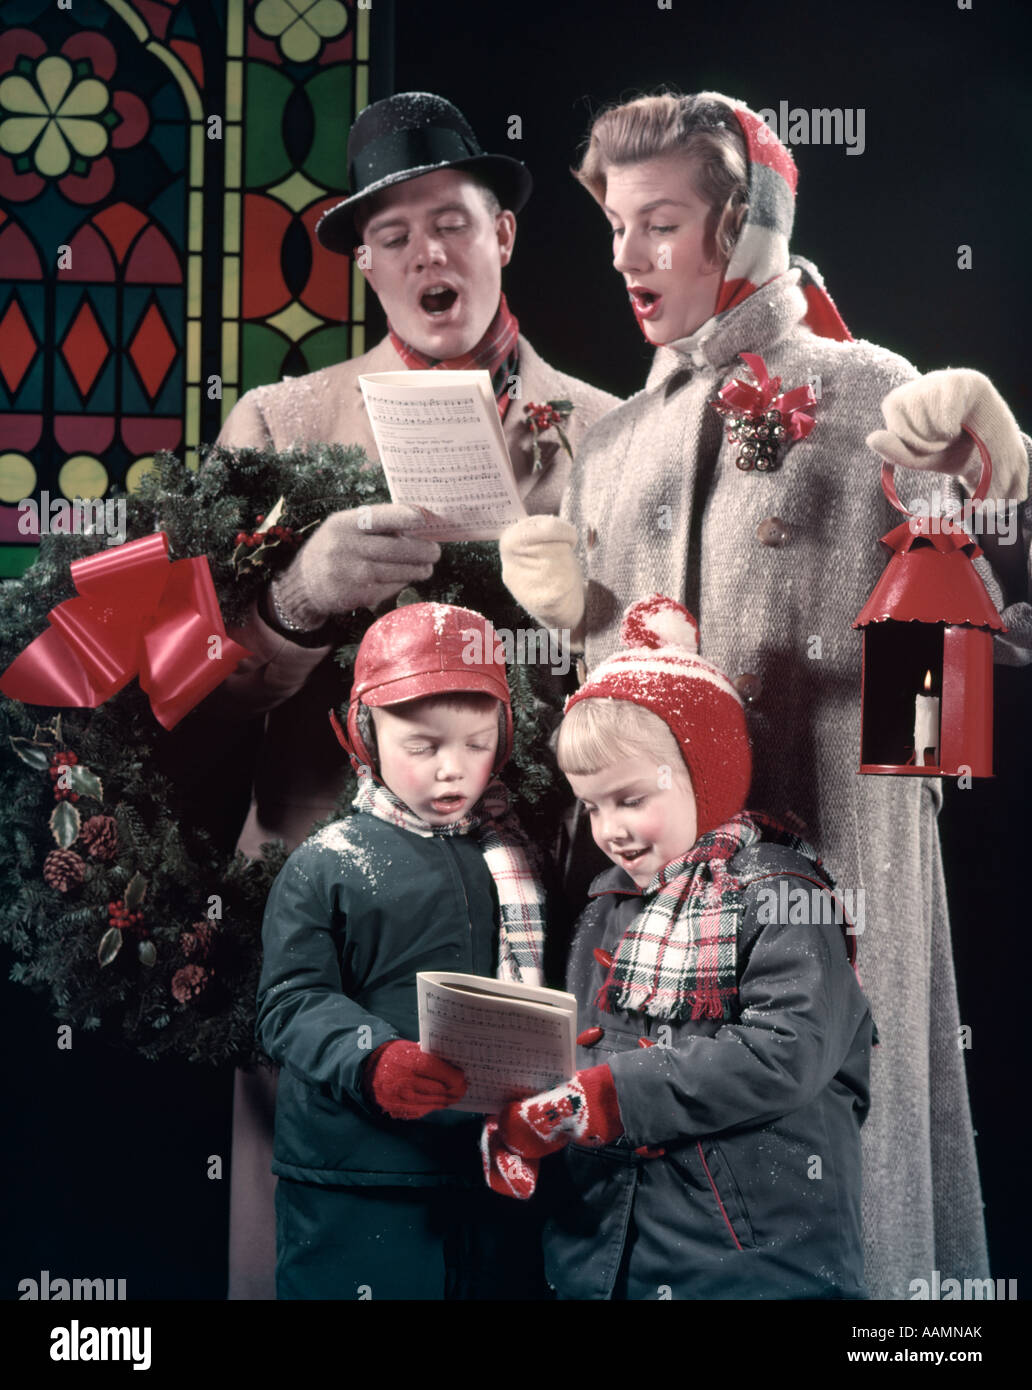 1950s FAMILY 4 SINGING CAROLS DAD MAN HAS WREATH OVER ARM MOM WOMAN HOLDS RED LANTERN BOY GIRL MUSIC SONG SNOW OUTDOOR Stock Photo